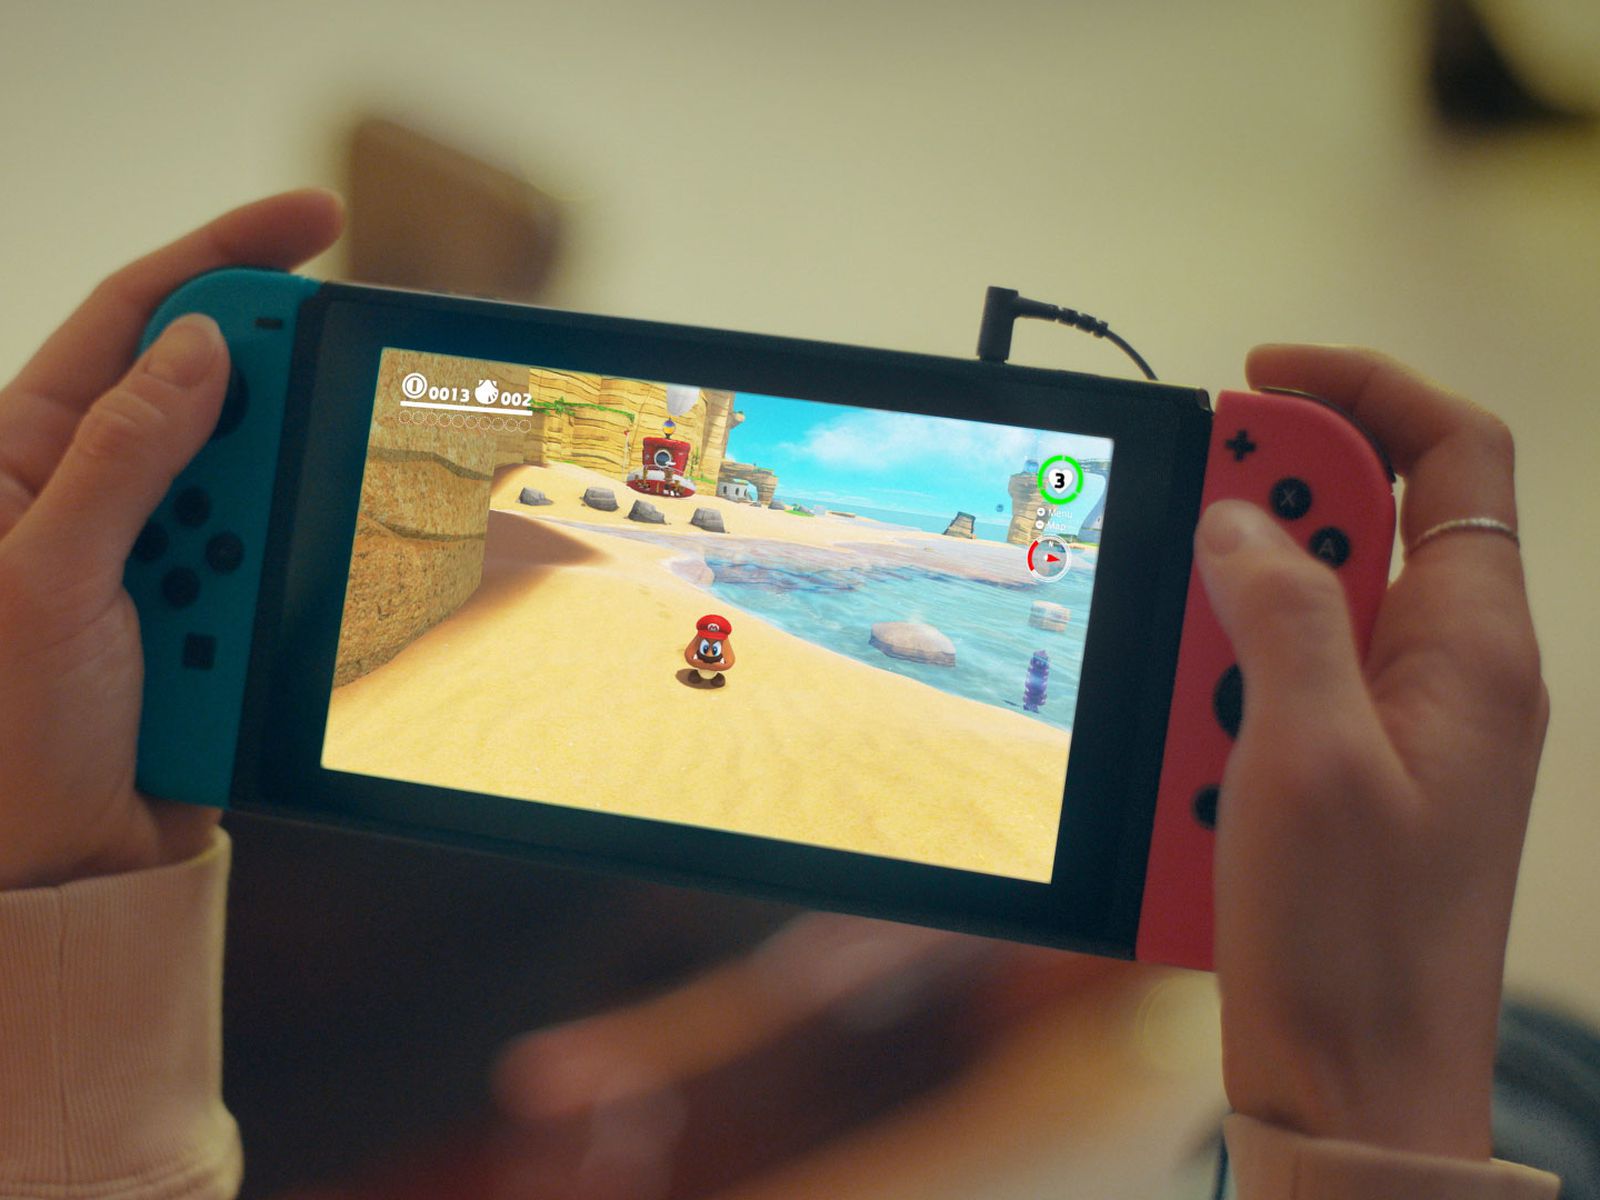 Diplomati Trænge ind vi Sketchy Rumor Claims Apple Developing Nintendo Switch-Style Gaming Console  - MacRumors